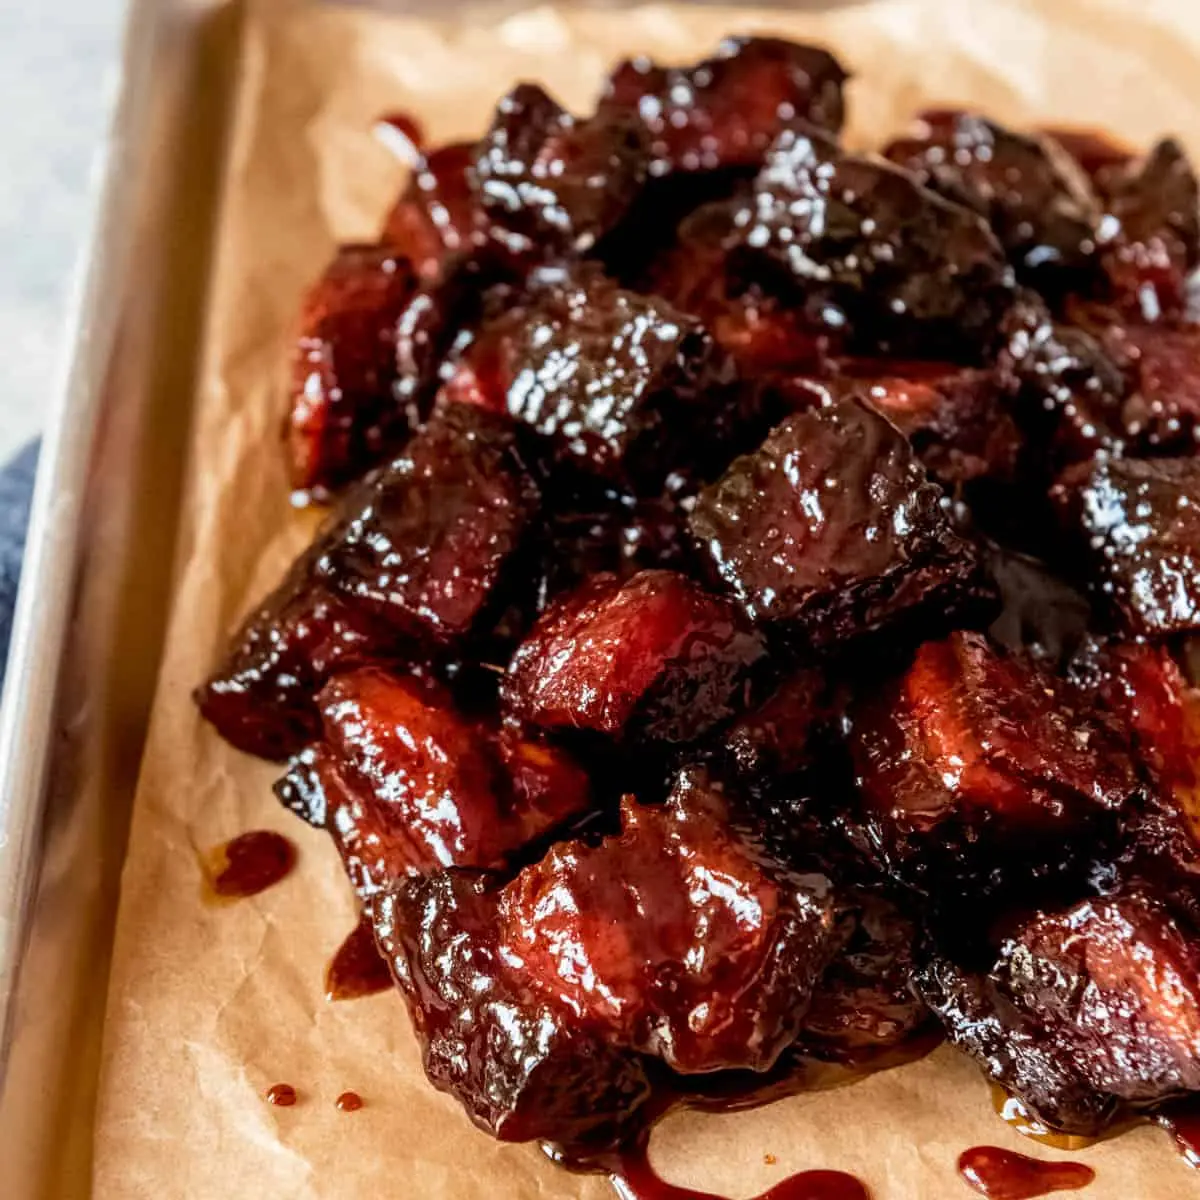 smoked pork belly burnt ends - What is the best cut of pork for burnt ends